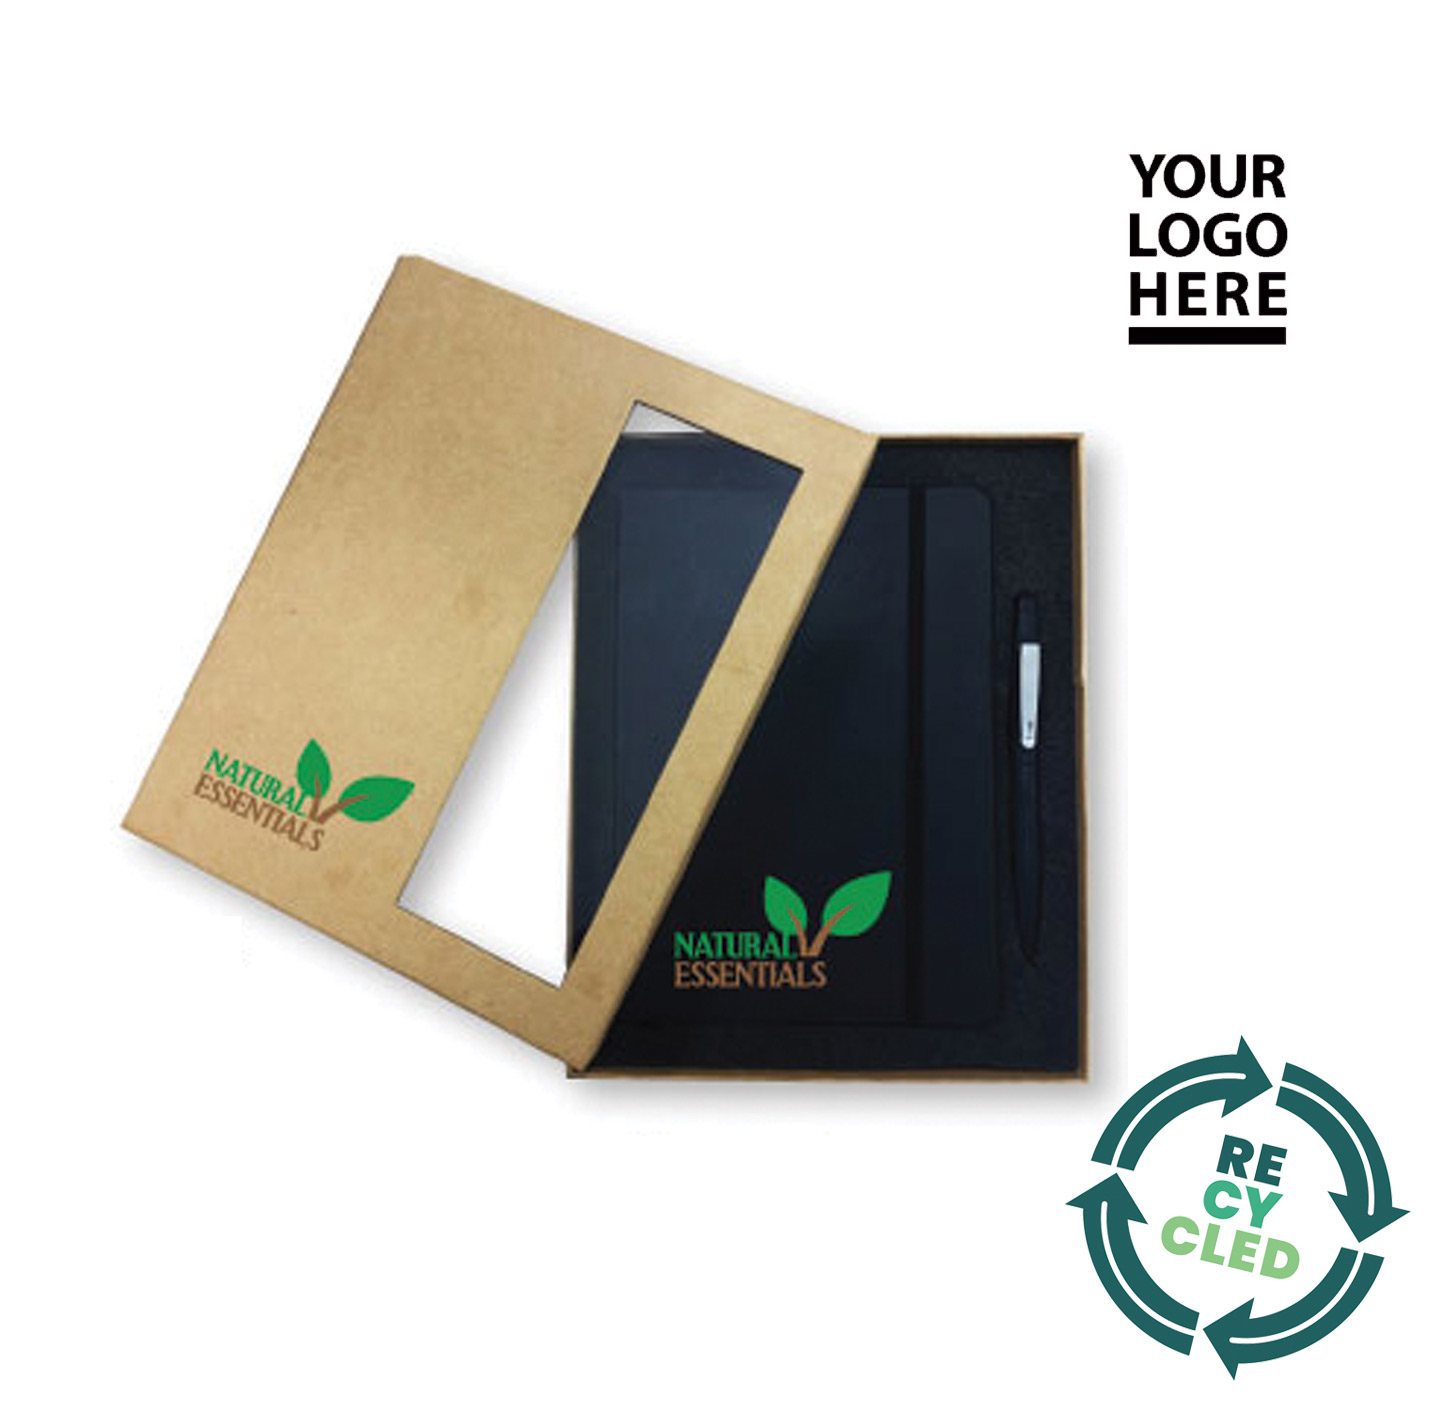 Note book and pen gift set in eco friendly box